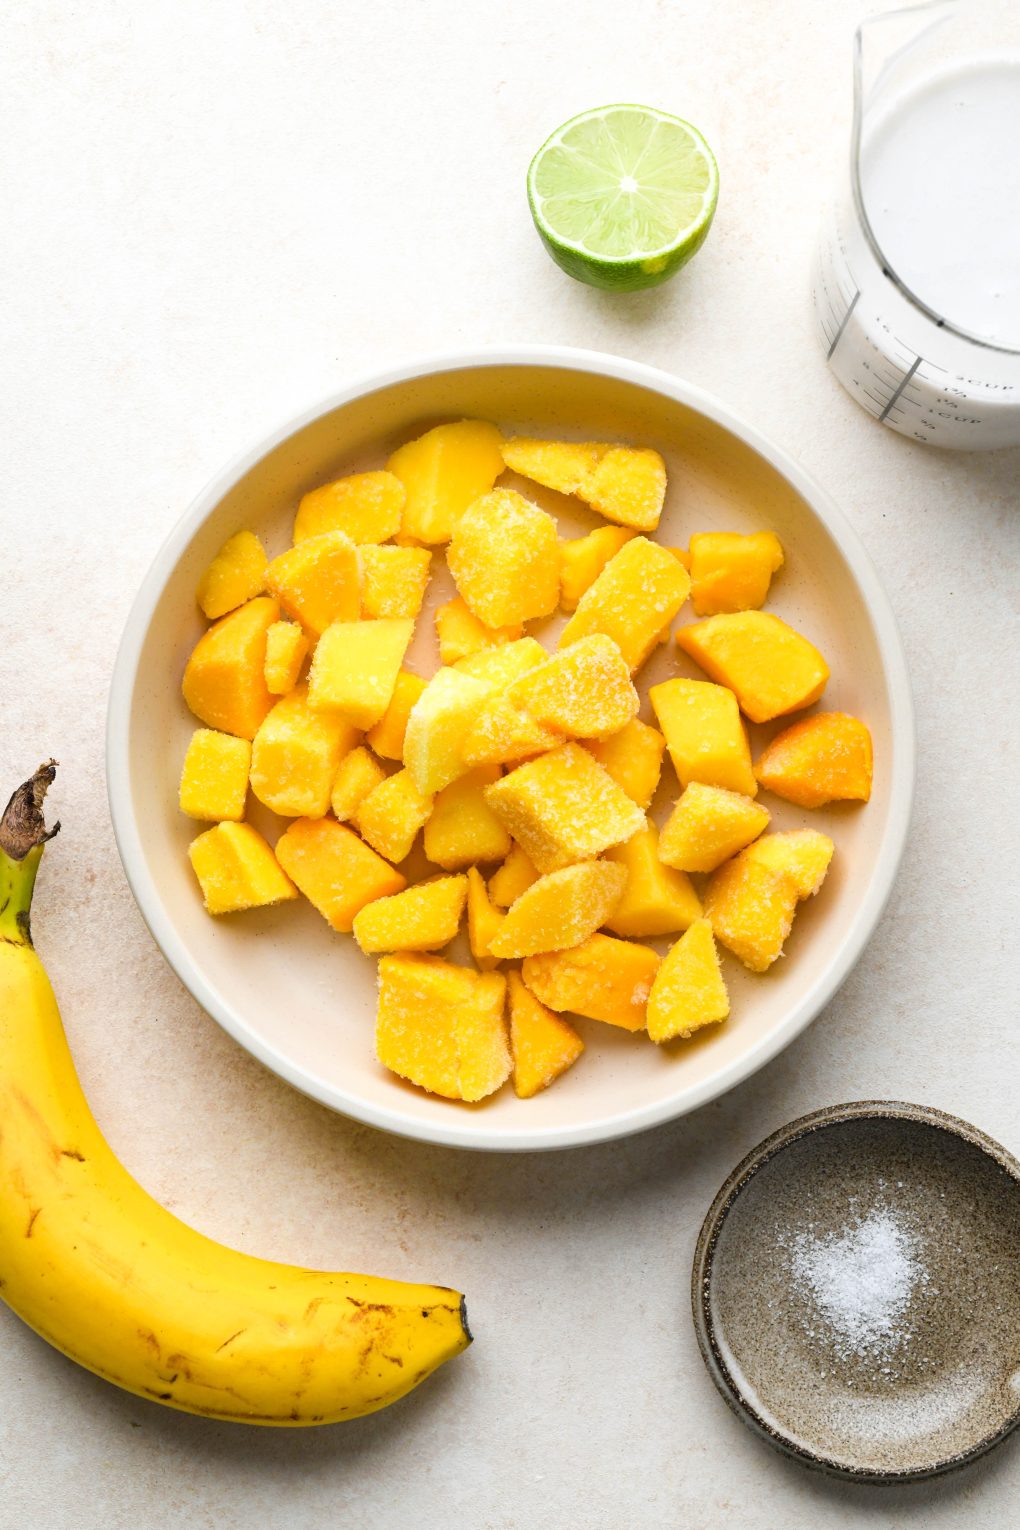 Ingredients for simple mango smoothies in various ceramics, on a cream colored background.